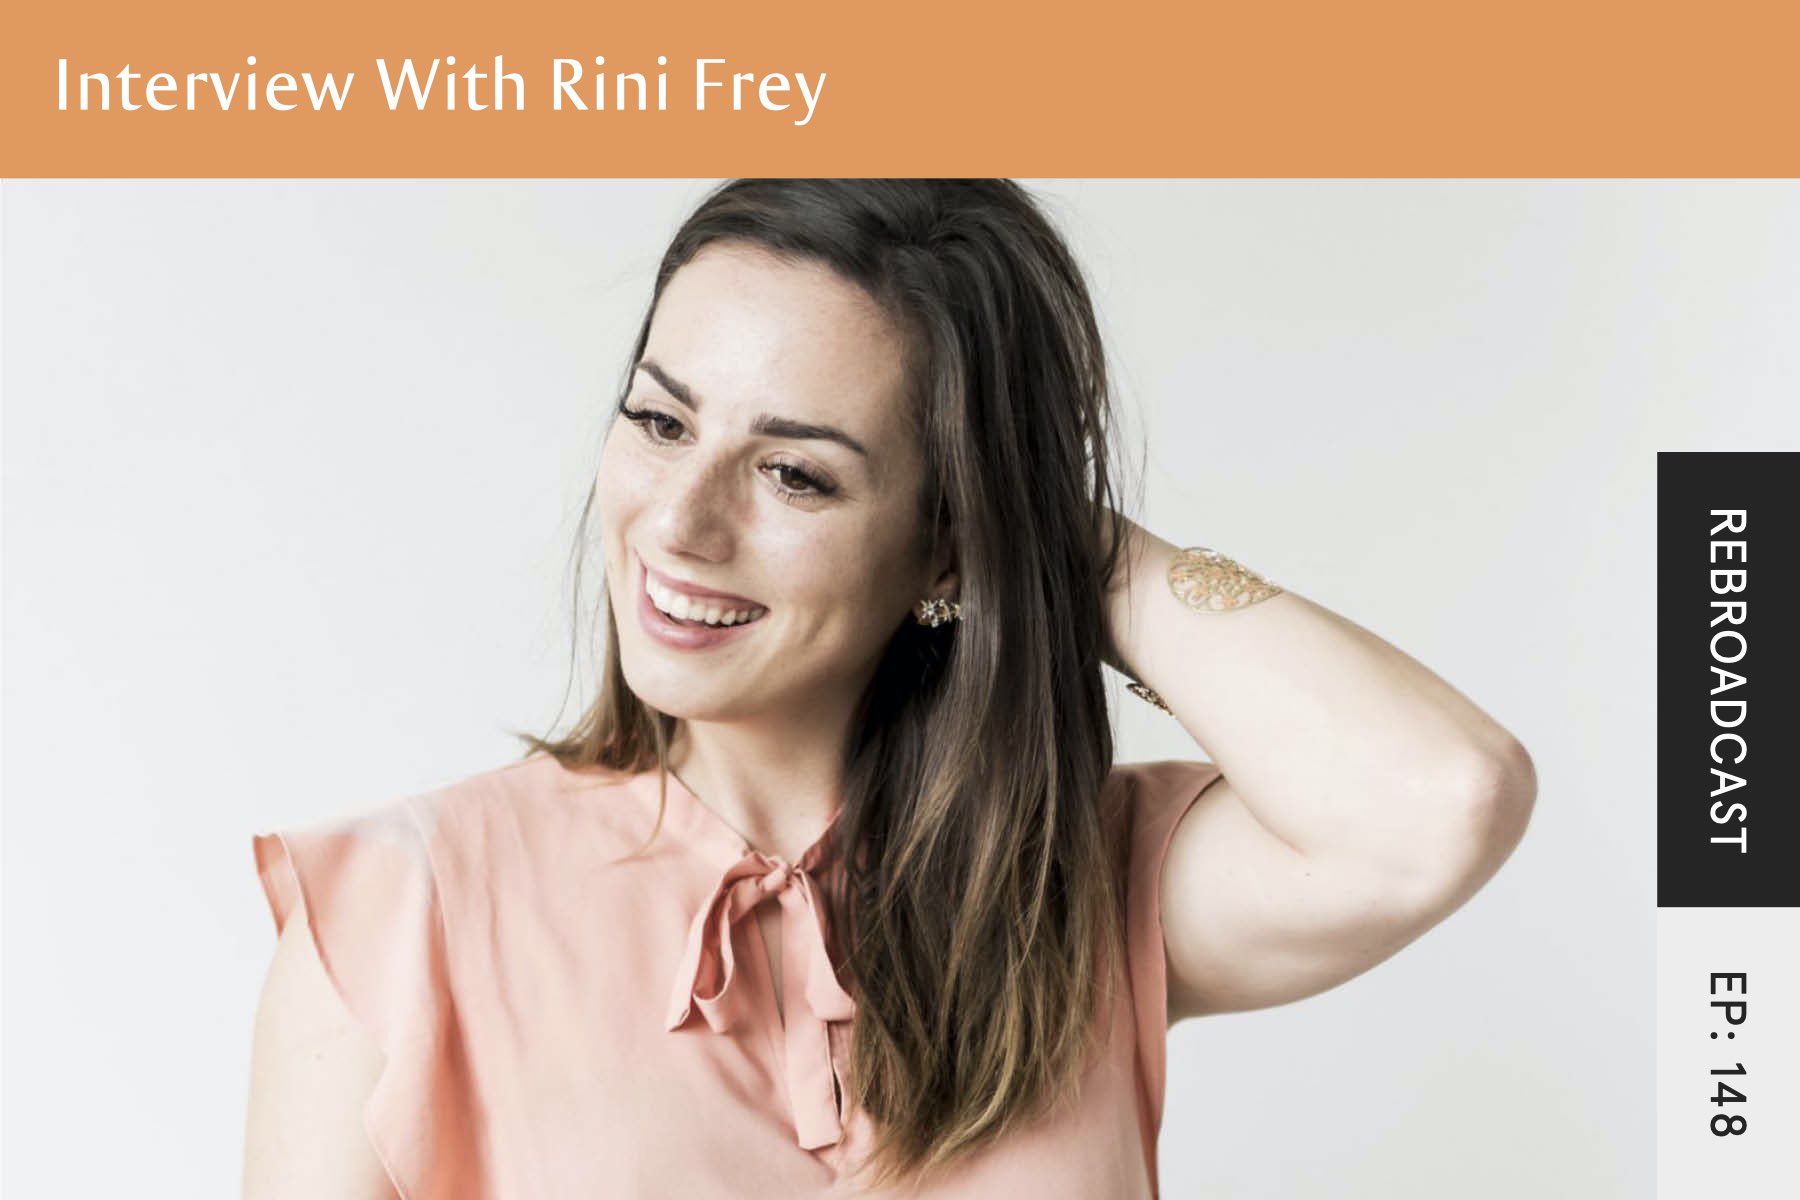 Rebroadcast: Interview with Rini Frey - Seven Health: Eating Disorder Recovery and Anti Diet Nutritionist